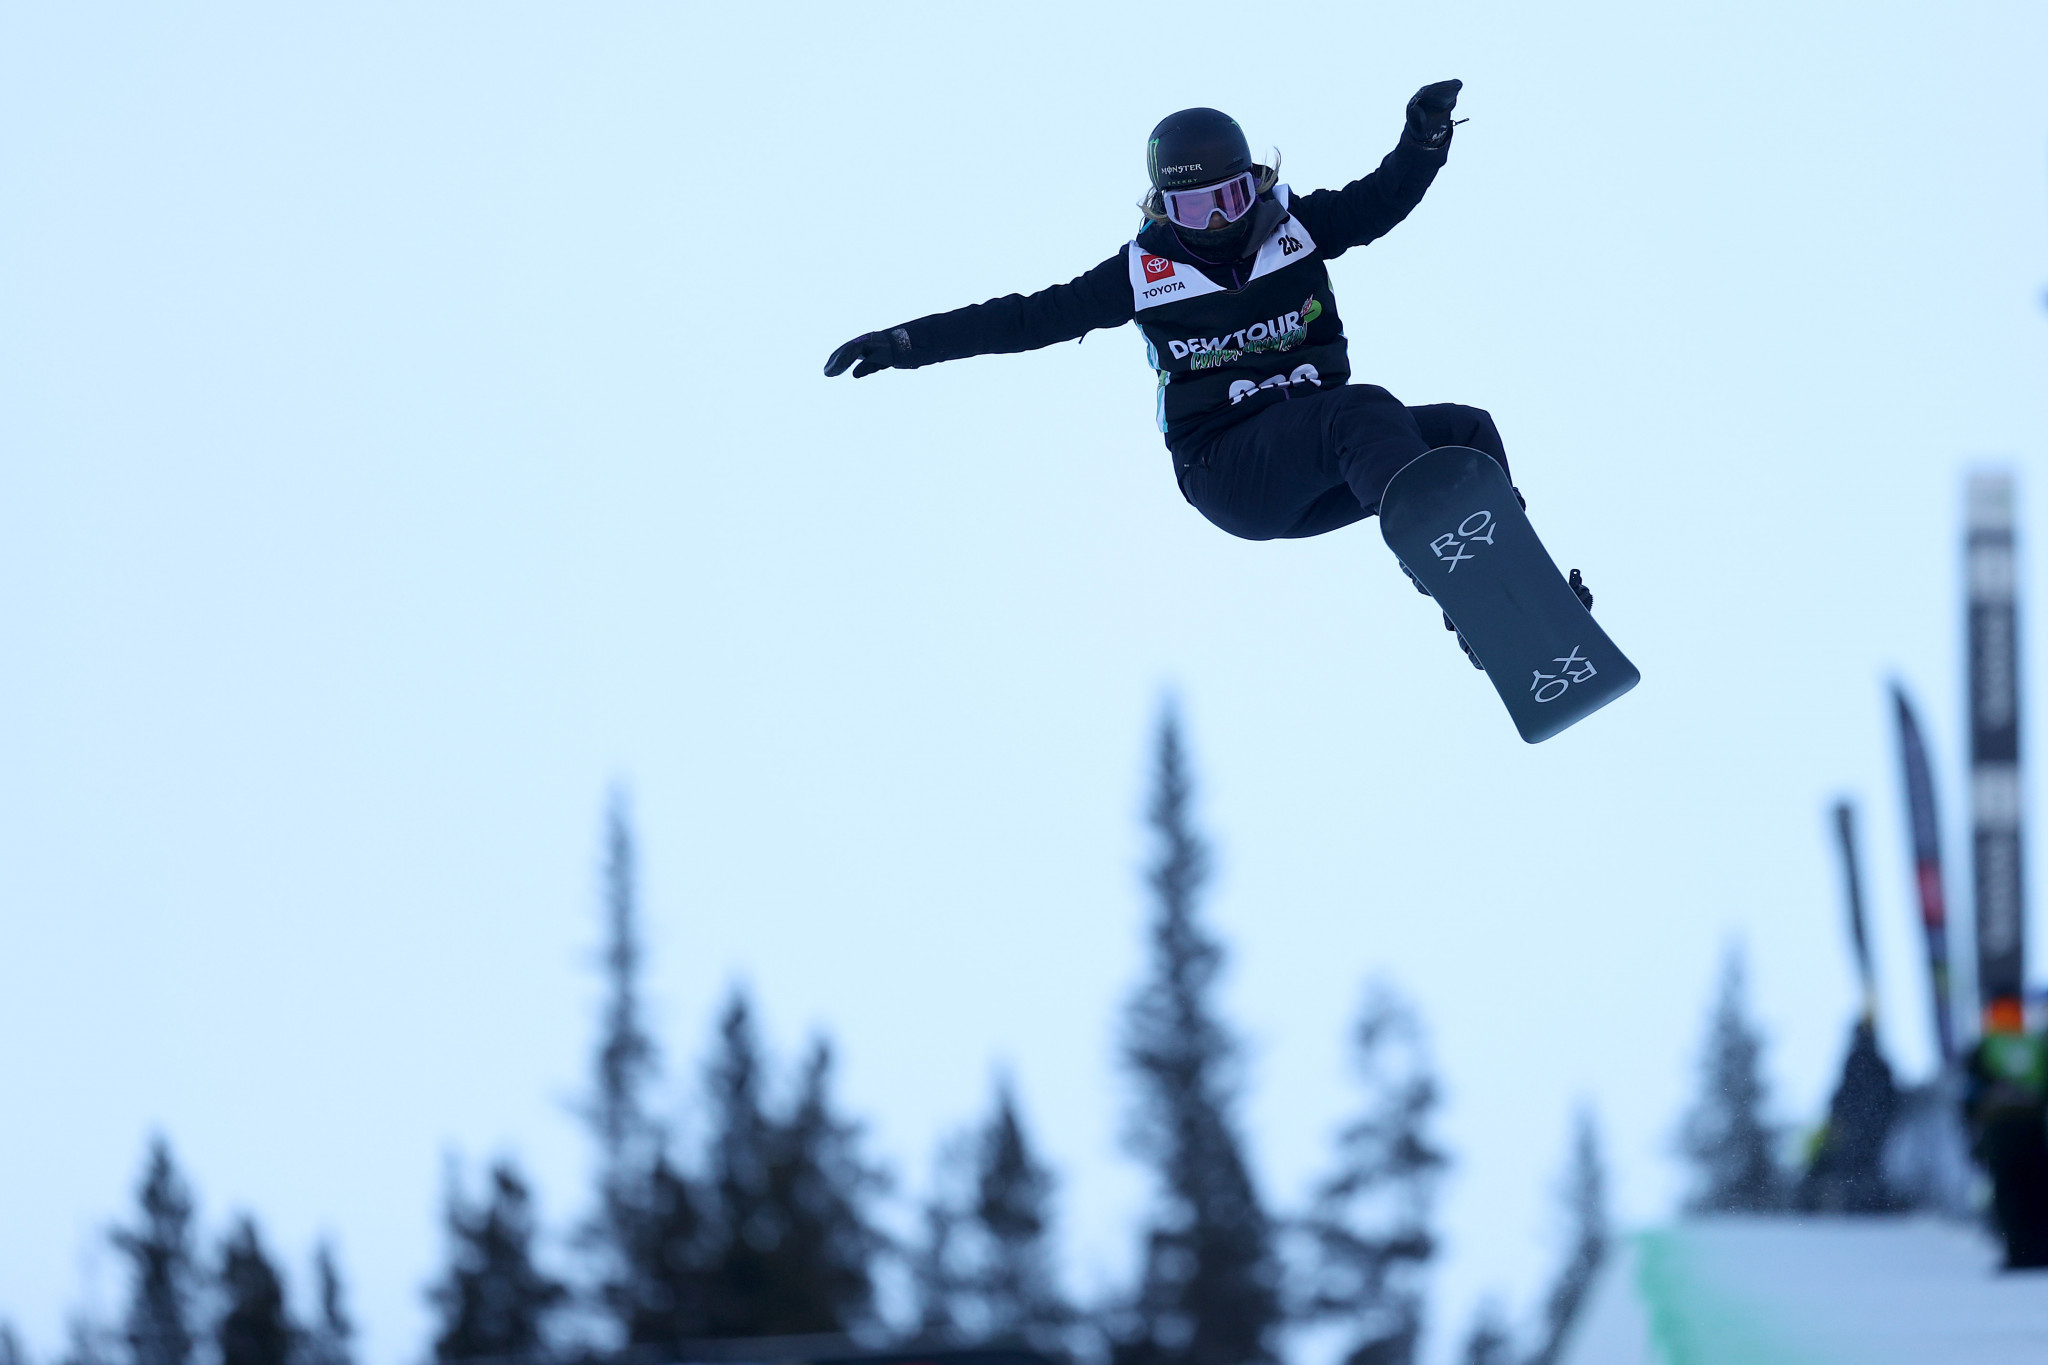 Chloe Kim is the only woman to win back-to-back Olympic snowboard halfpipe gold medals ©Getty Images